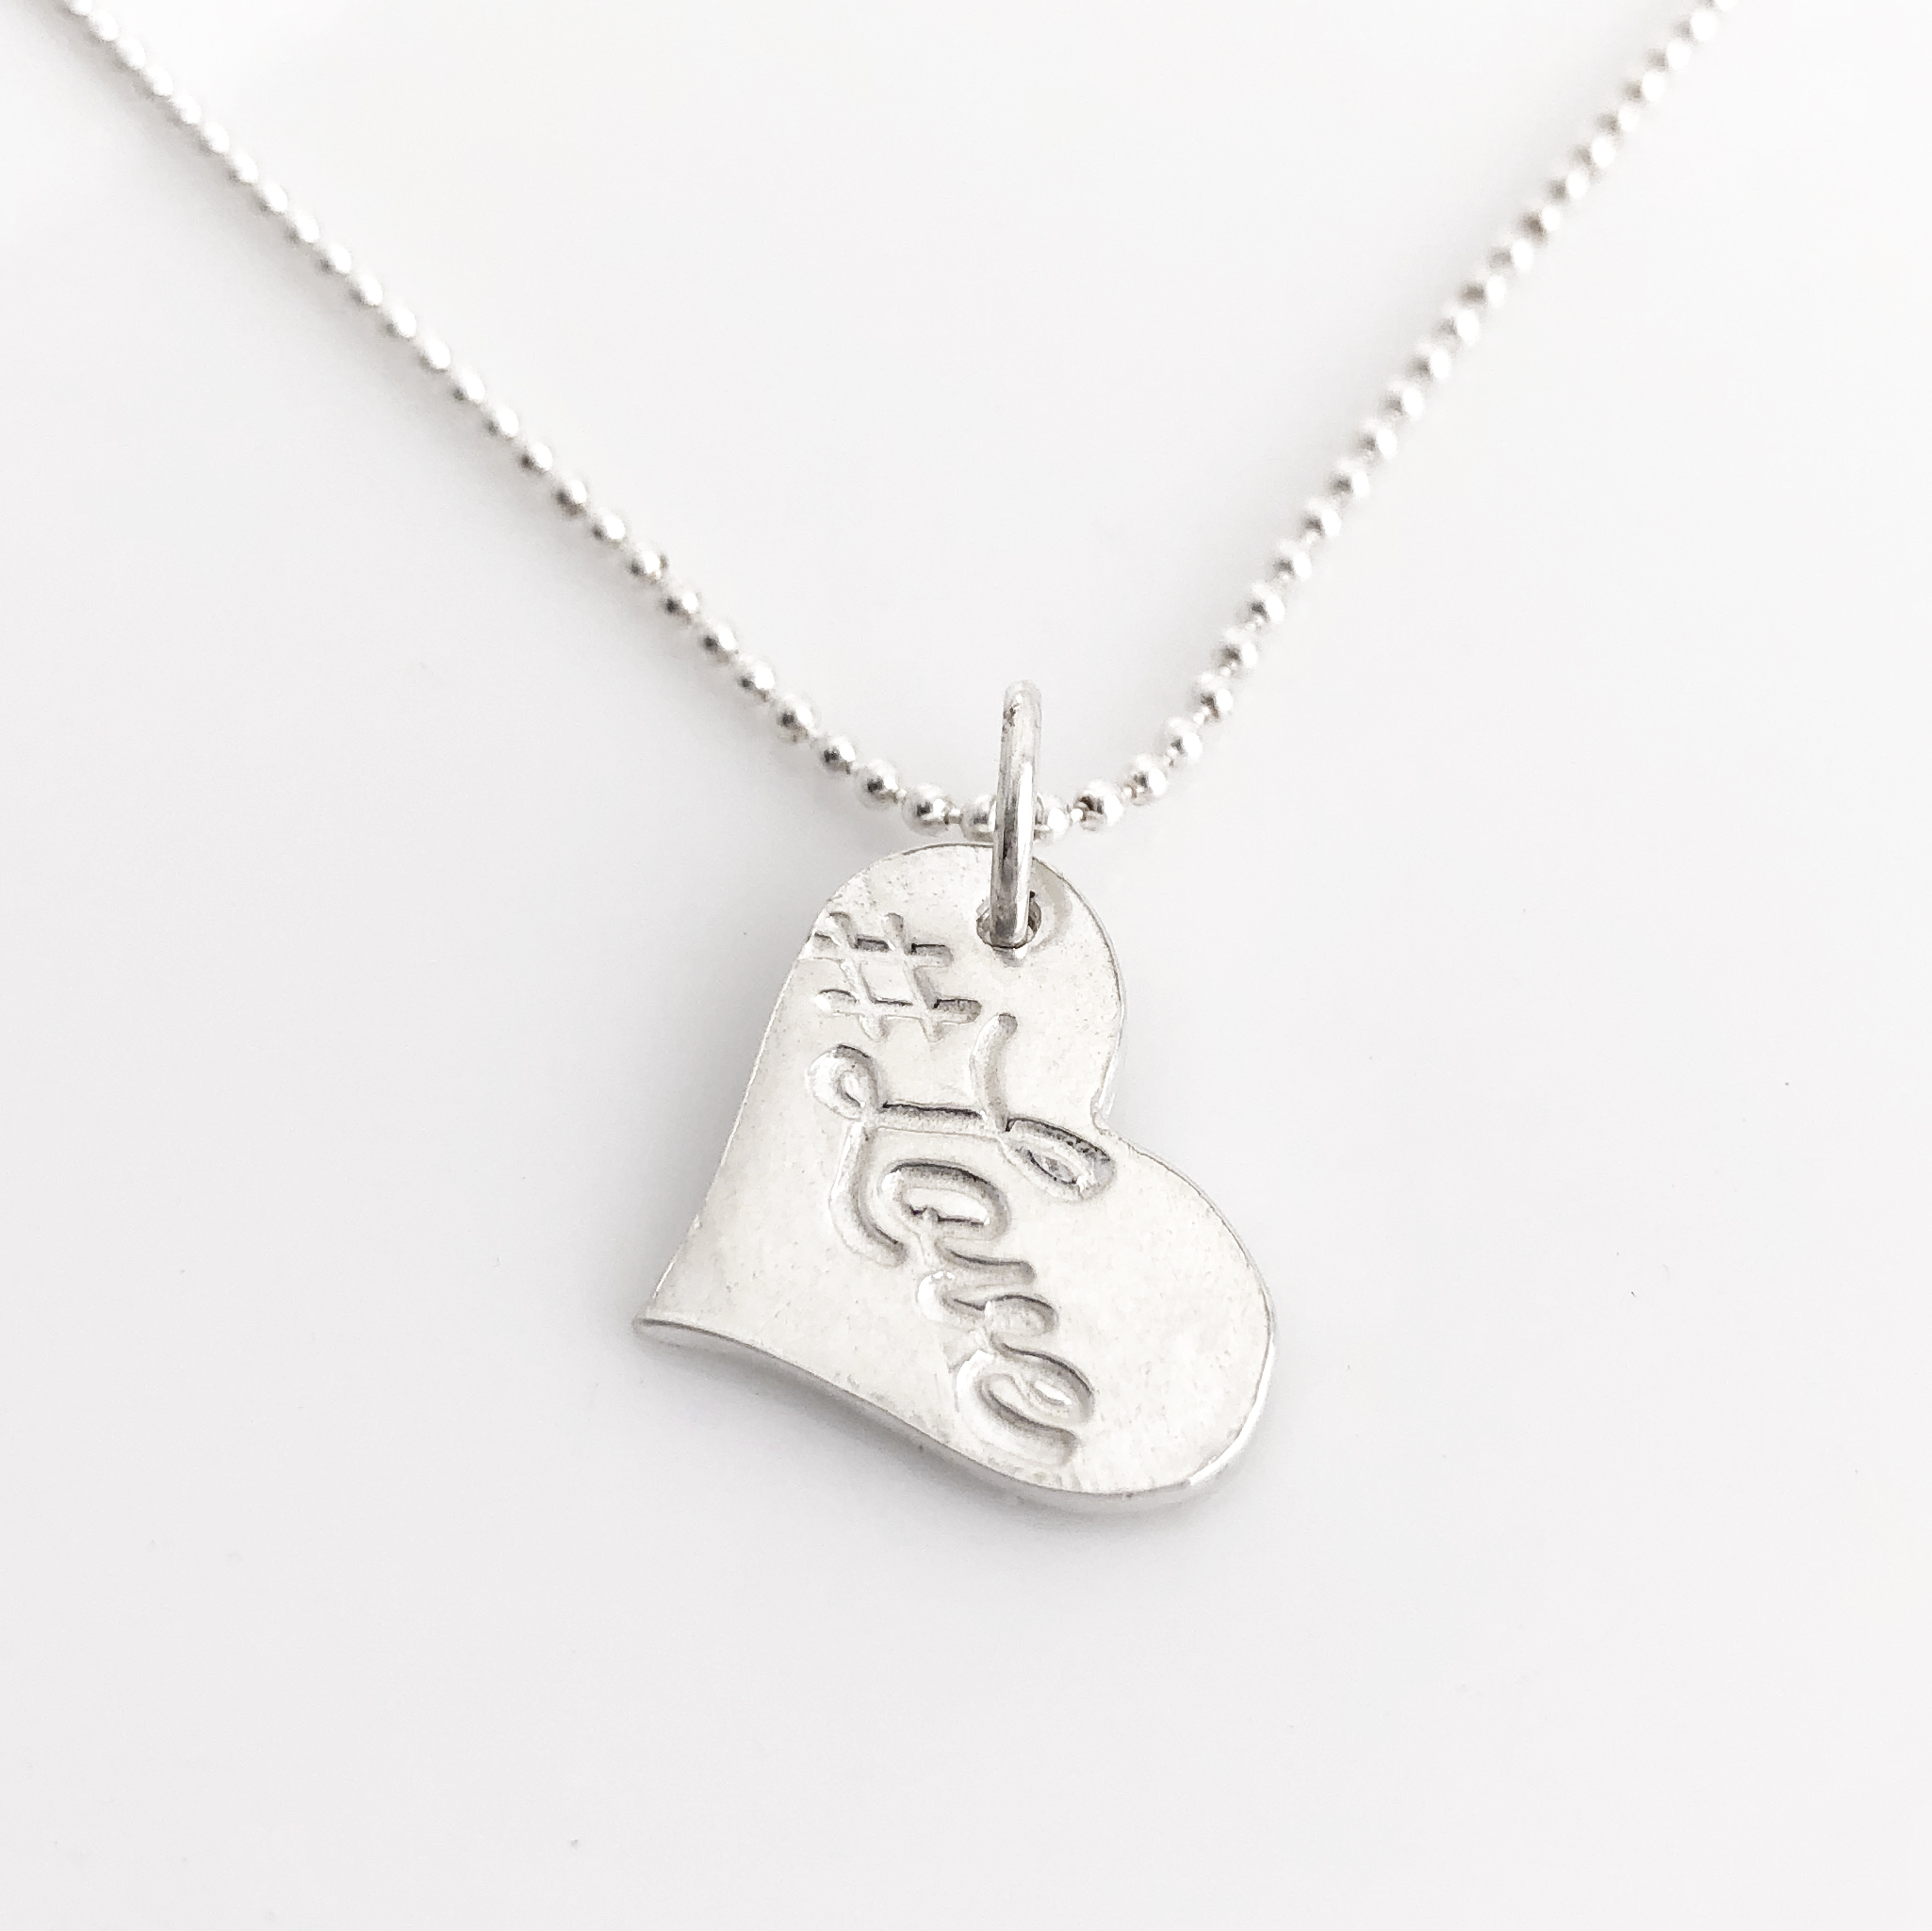 #Love Fine Silver Heart hanging from a sterling ball chain, shown on a white background.